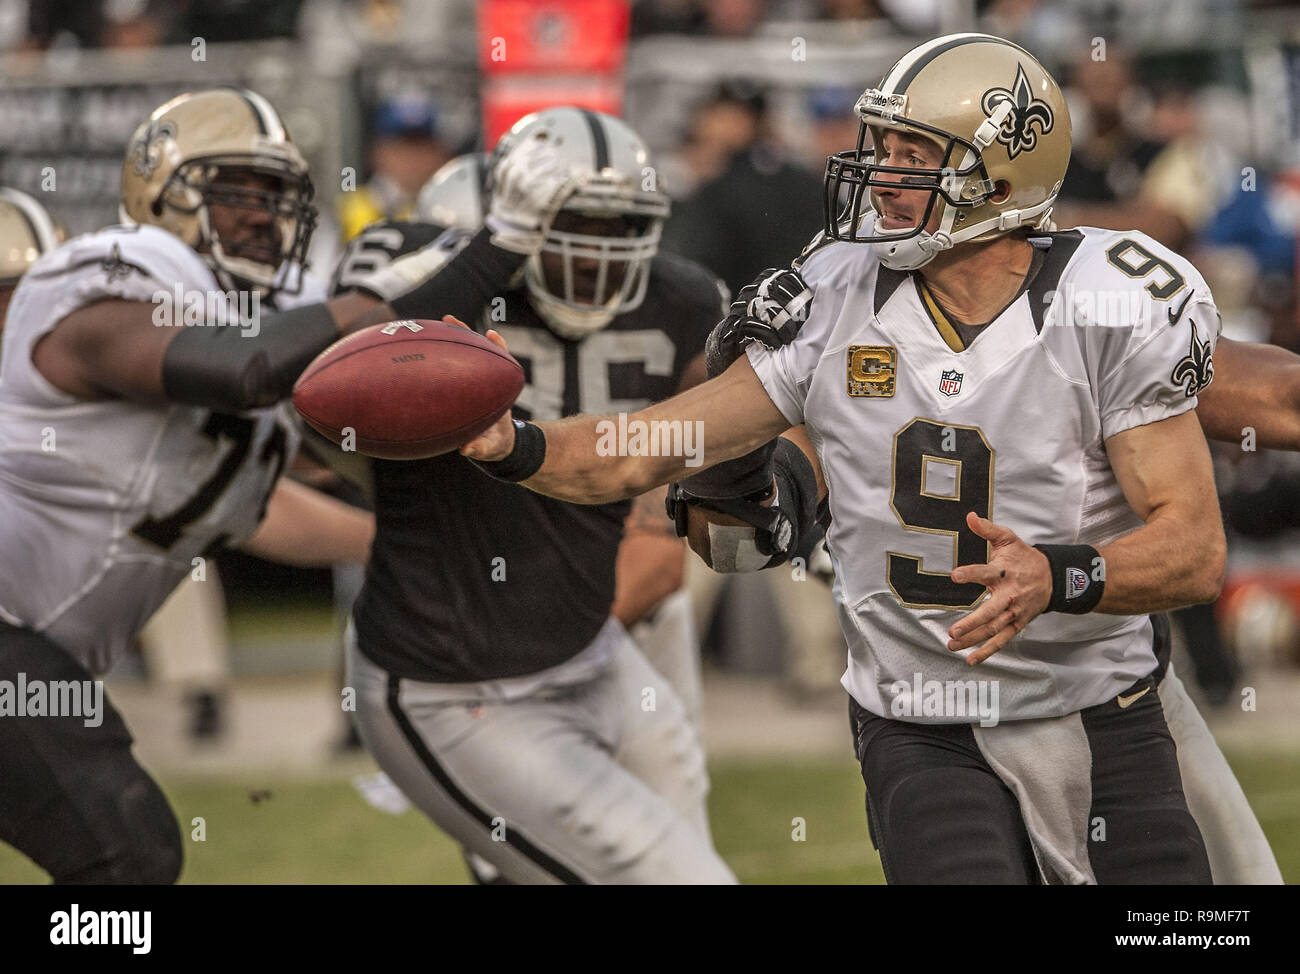 November 18, 2012 - Oakland, California, U.S - New Orleans Saints quarterback Drew Brees (9) makes quick pass before he is sacked on Sunday at O.co Coliseum in Oakland, CA.  The Saints defeated the Raiders 38-17. (Credit Image: © Al Golub/ZUMA Wire) Stock Photo